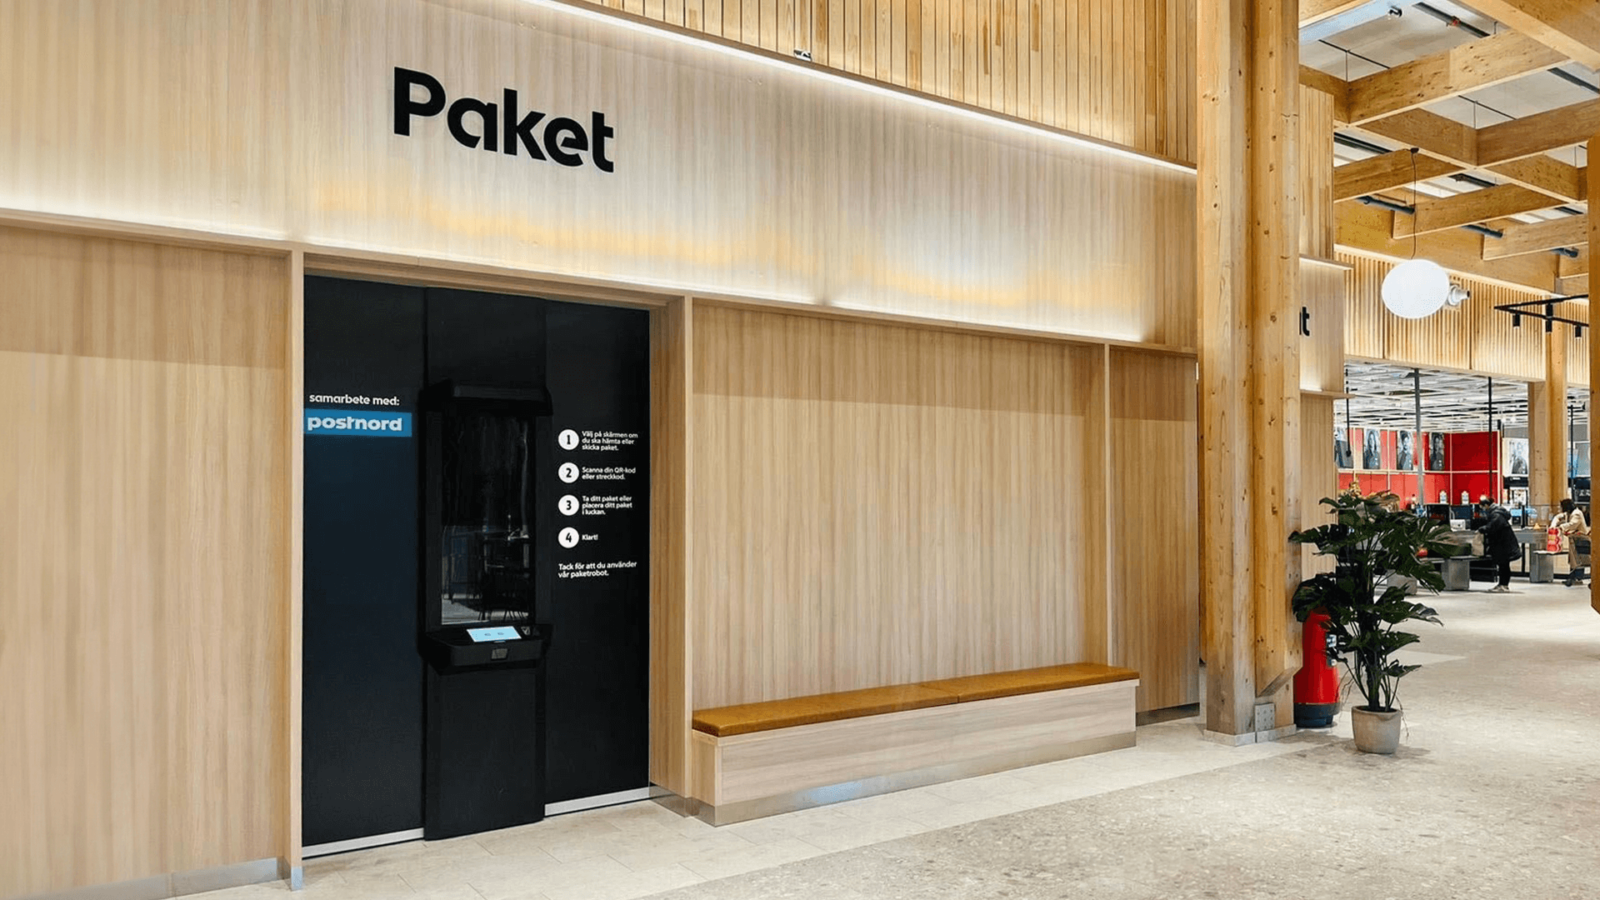 Cleveron 402 robotic parcel locker in ICA store behind a wall, only the intuitive black console is visible, providing access for package deposits and retrievals